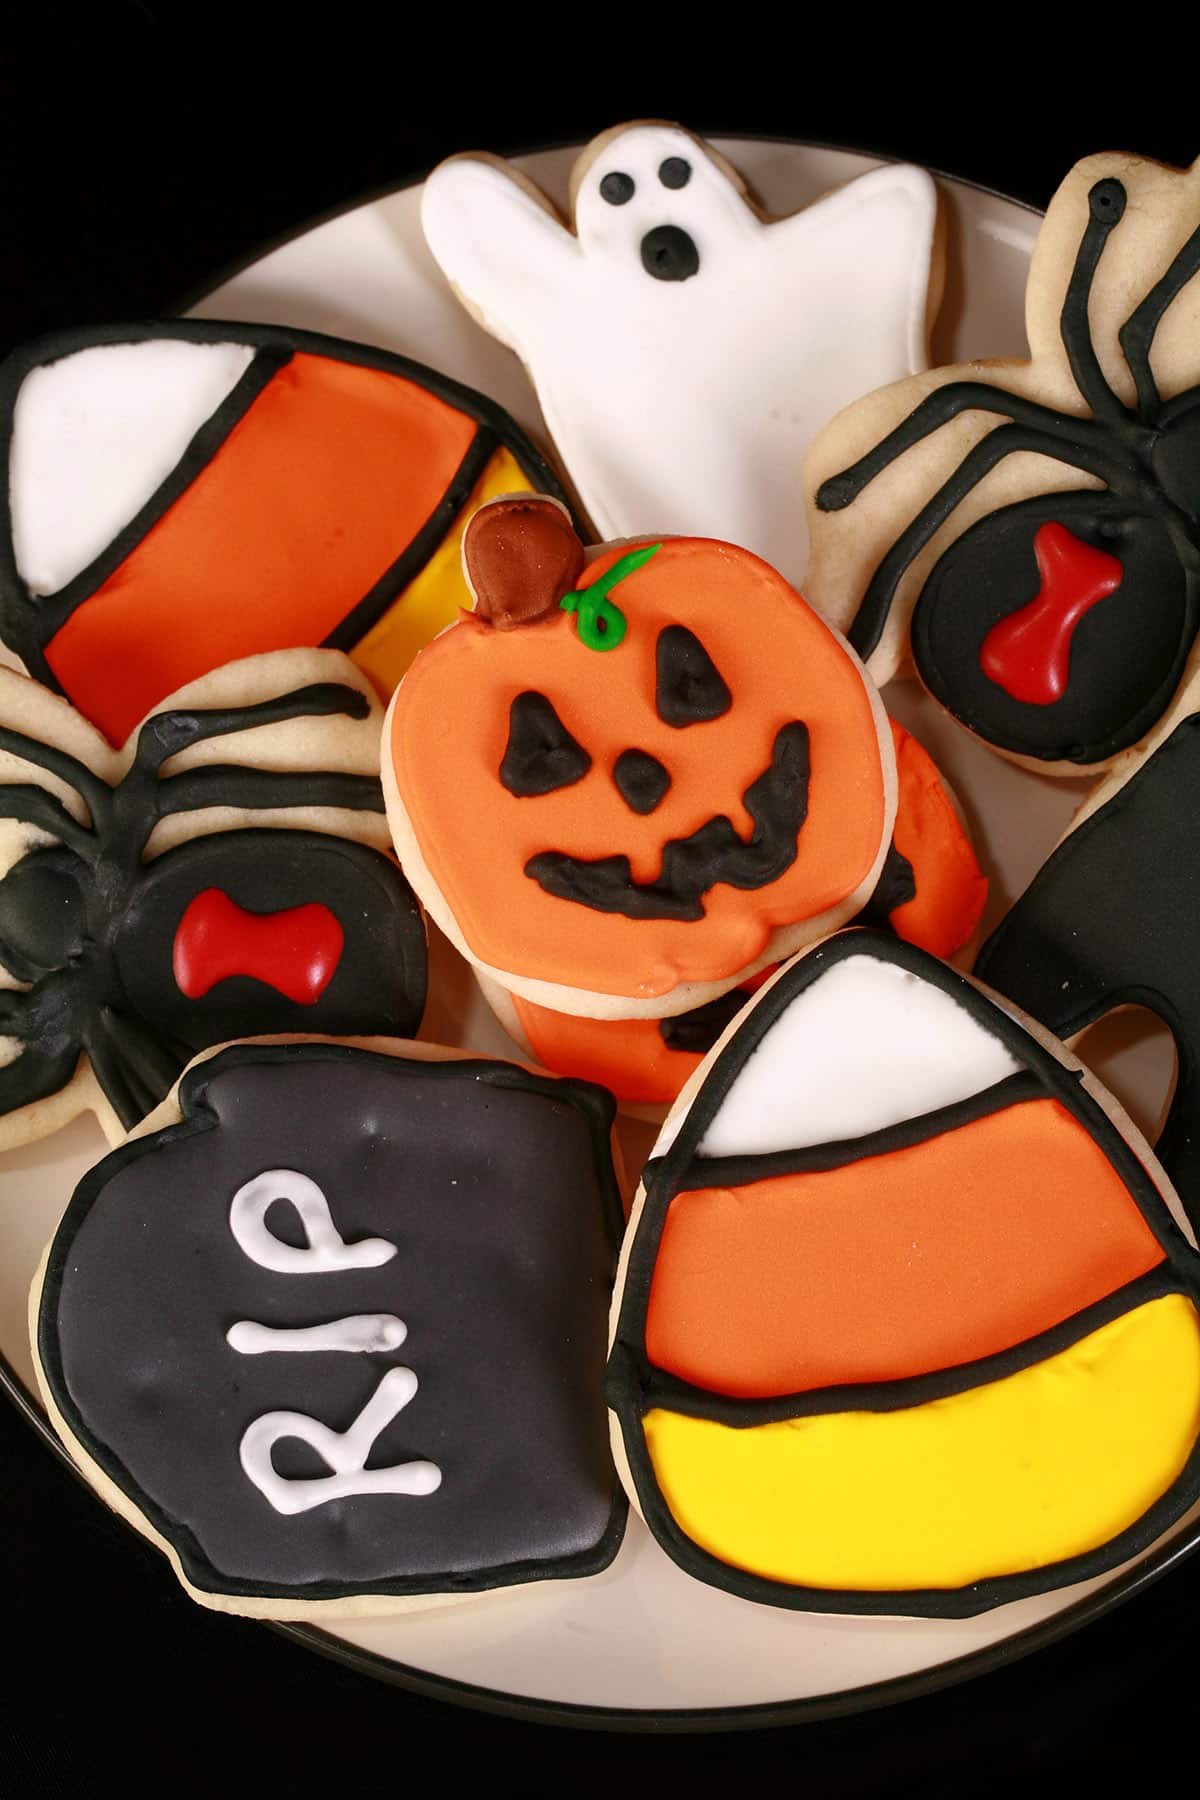 A plate of brightly colored Halloween themed decorated sugar cookies.